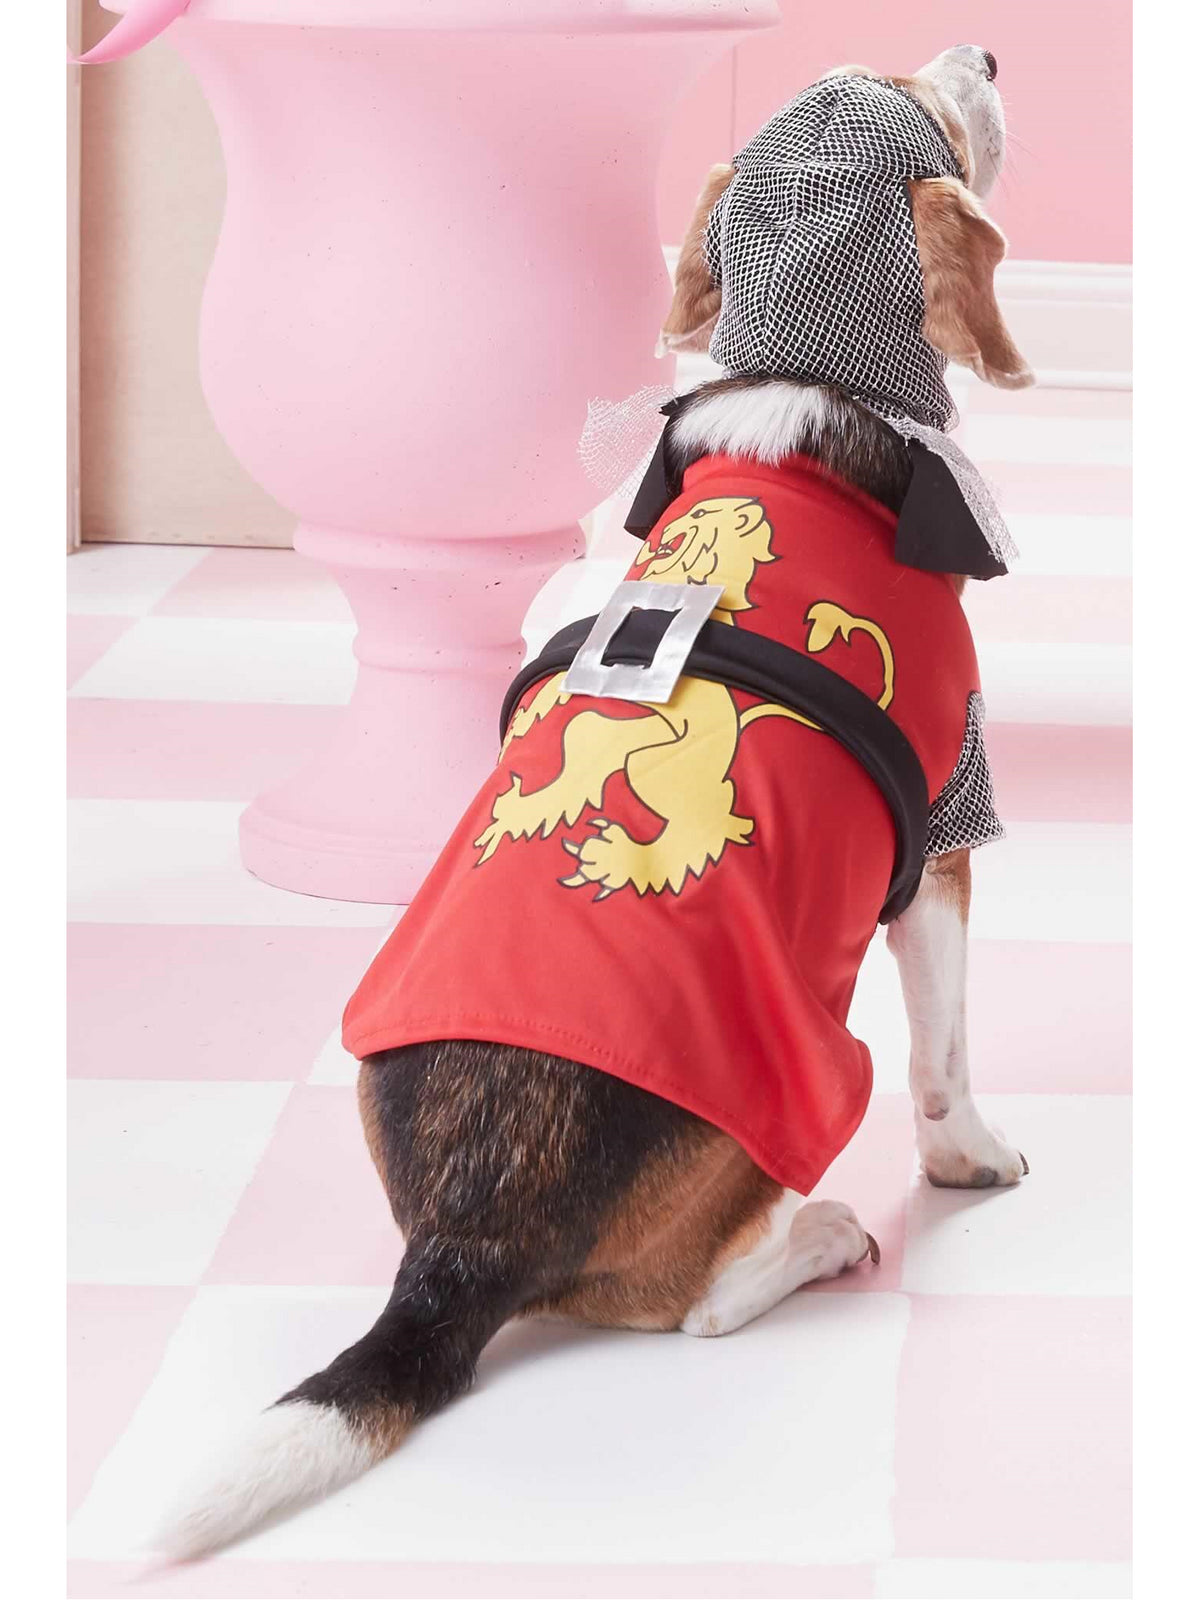 Sir Barks-a-Lot Costume for Dogs - Chasing Fireflies